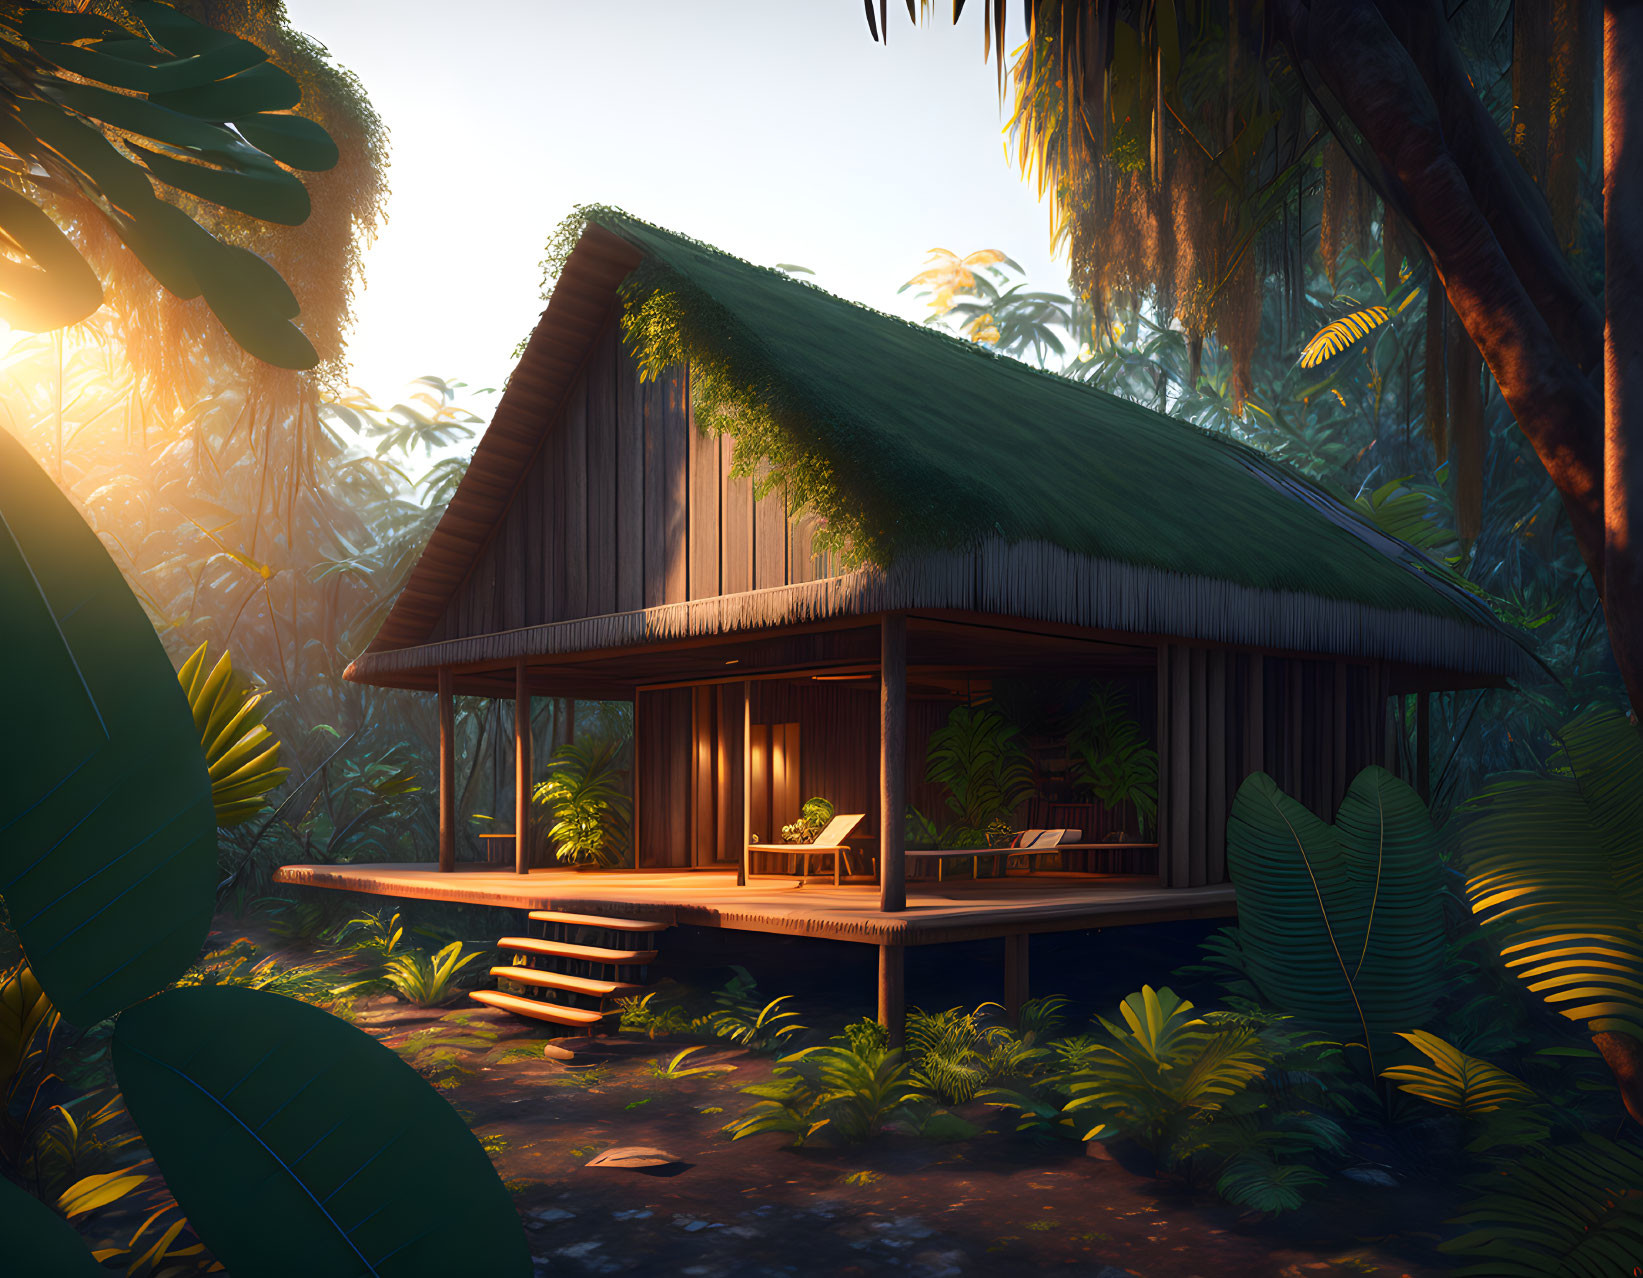 Wooden cabin with thatched roof in lush tropical forest under warm sunlight.